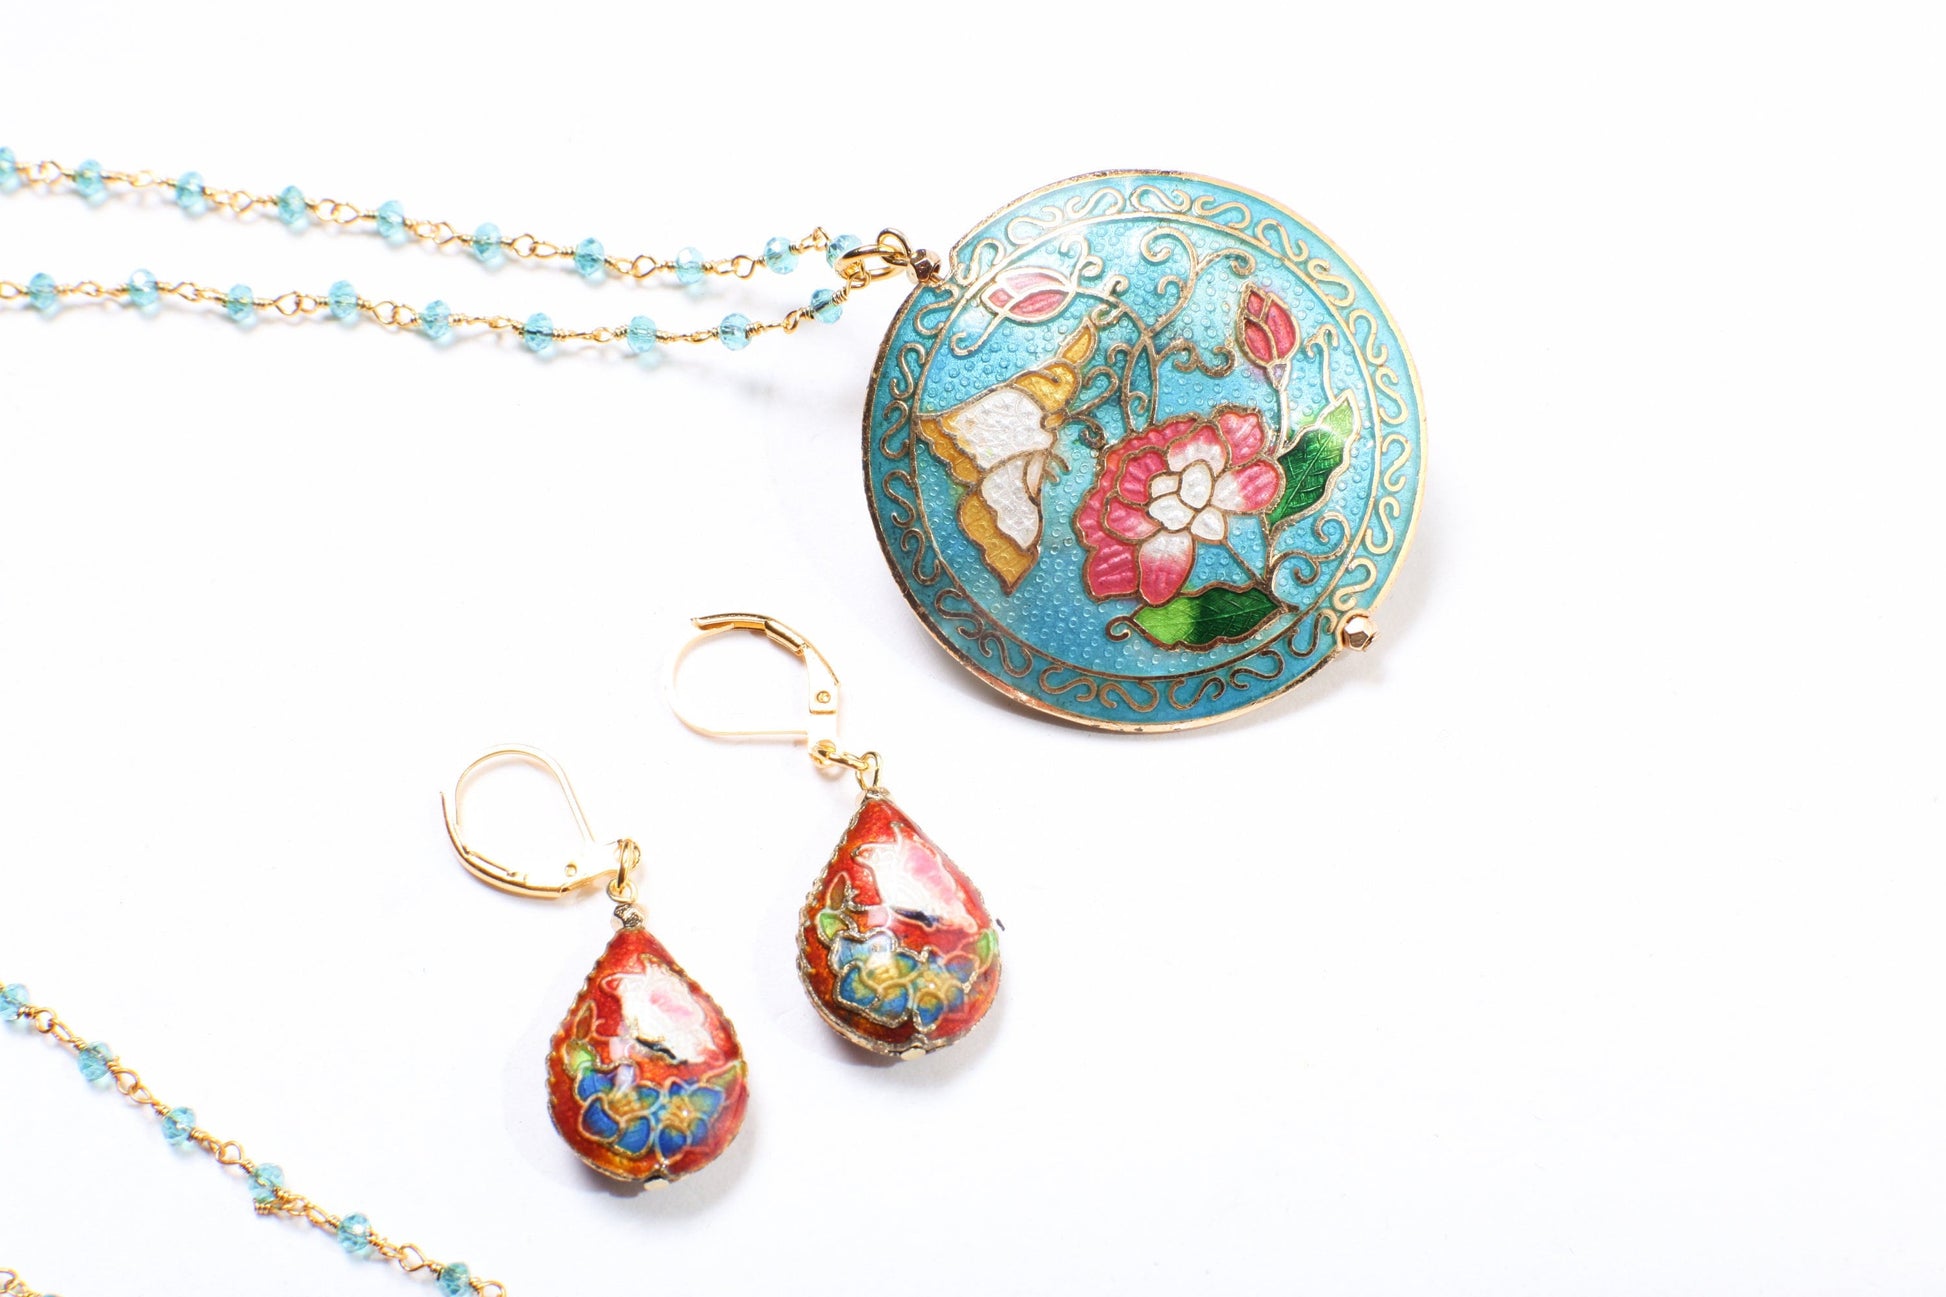 Traditional Cloisonné Pendant Vintage Floral Flowers Pink Revisable Focal with Beaded Chain Necklace 20" and matching Earrings set